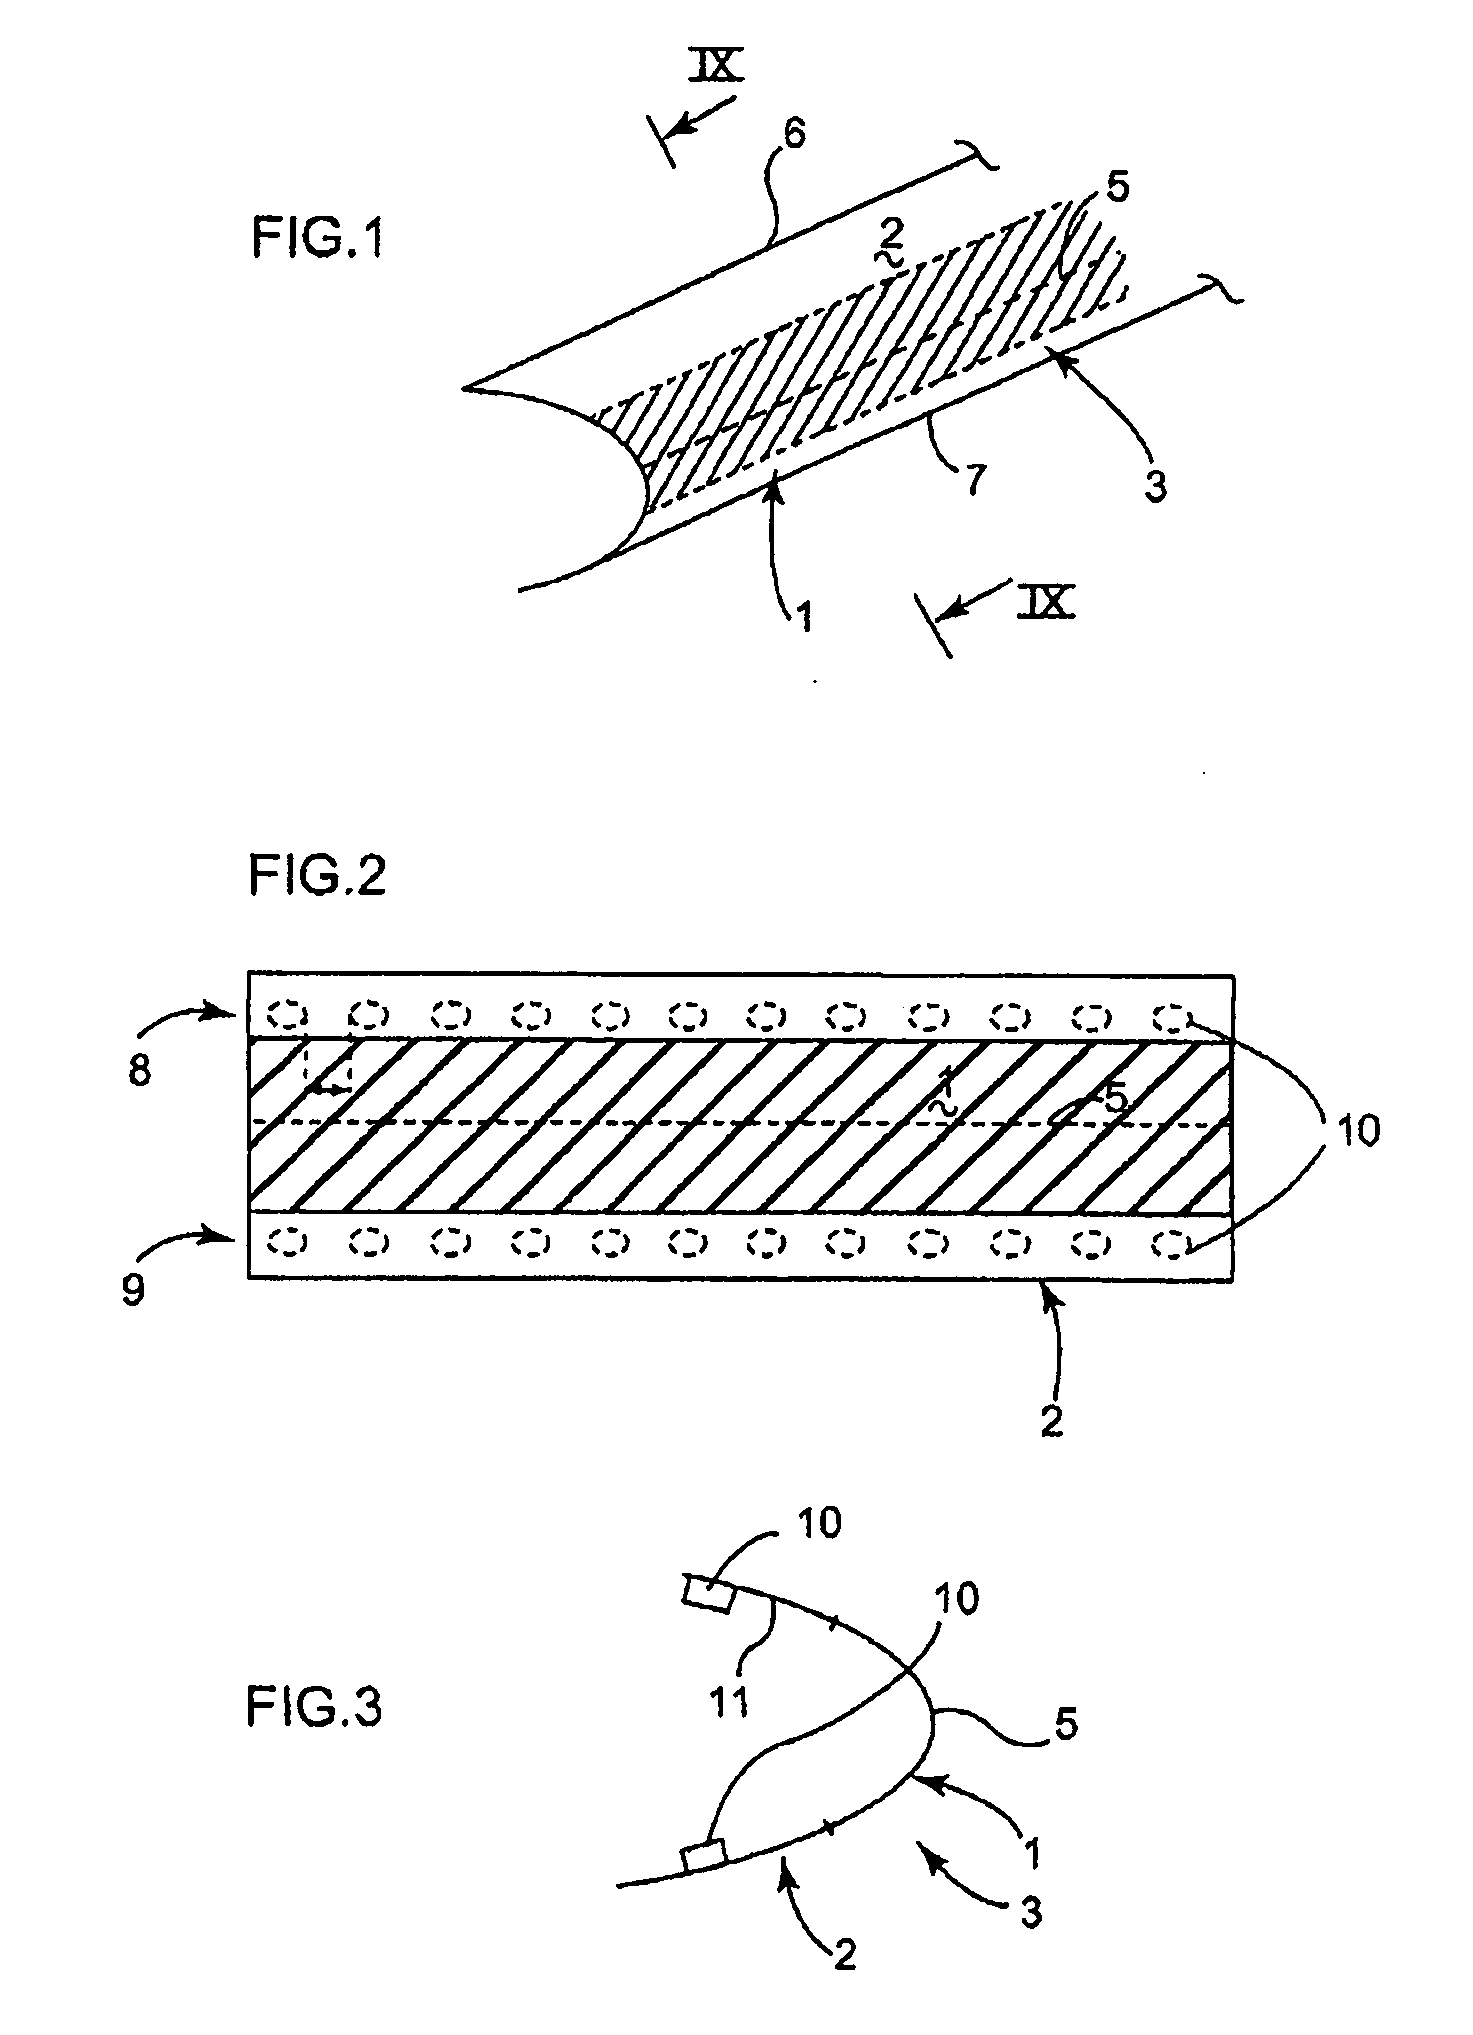 Anti-icing / de-icing system and method and aircraft structure incorporating this system